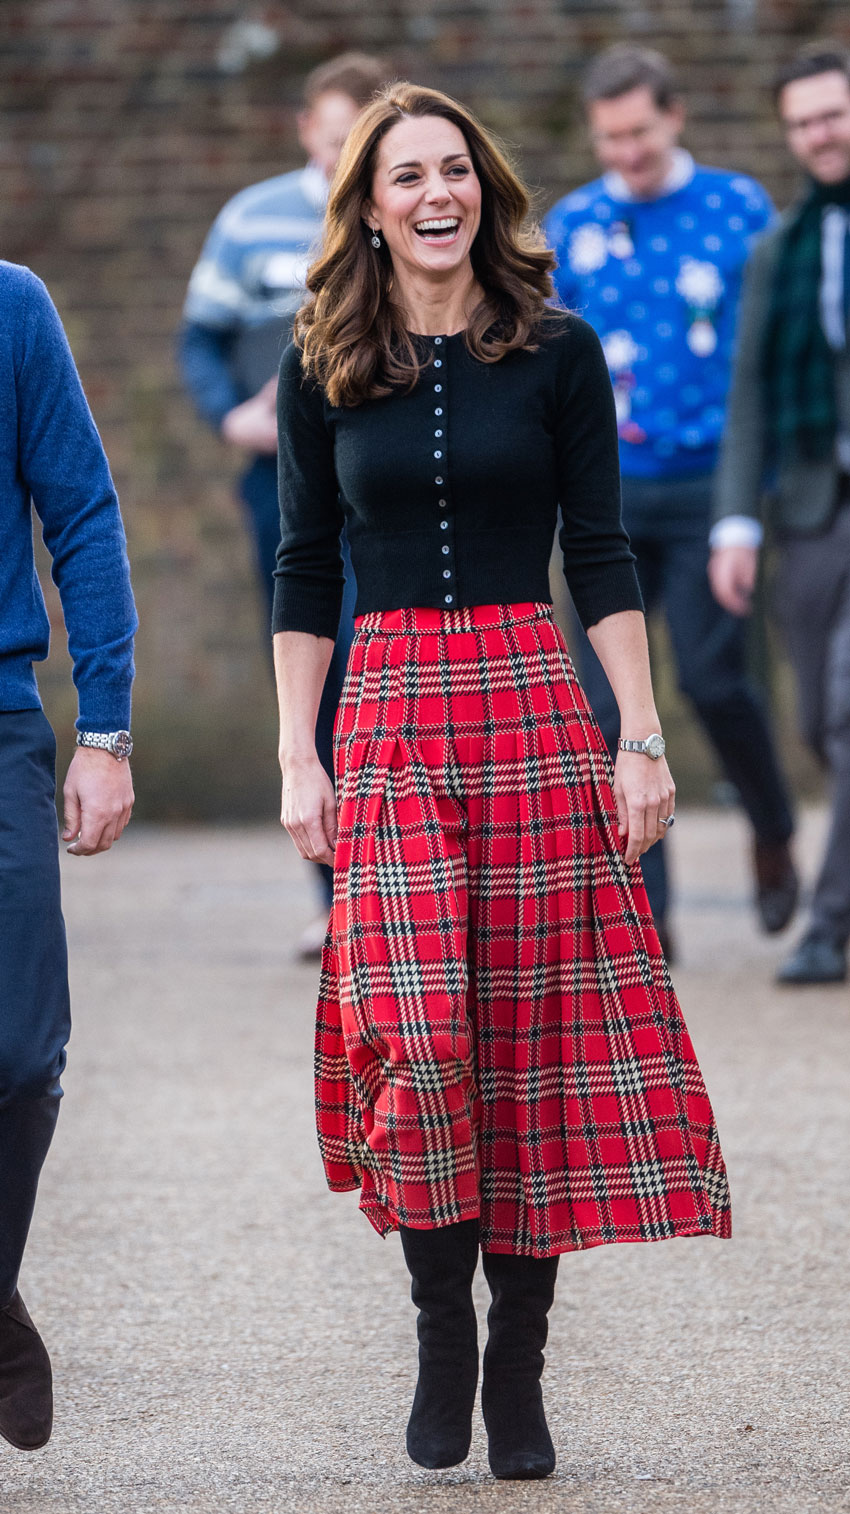 The winter fashion trends Kate Middleton loves